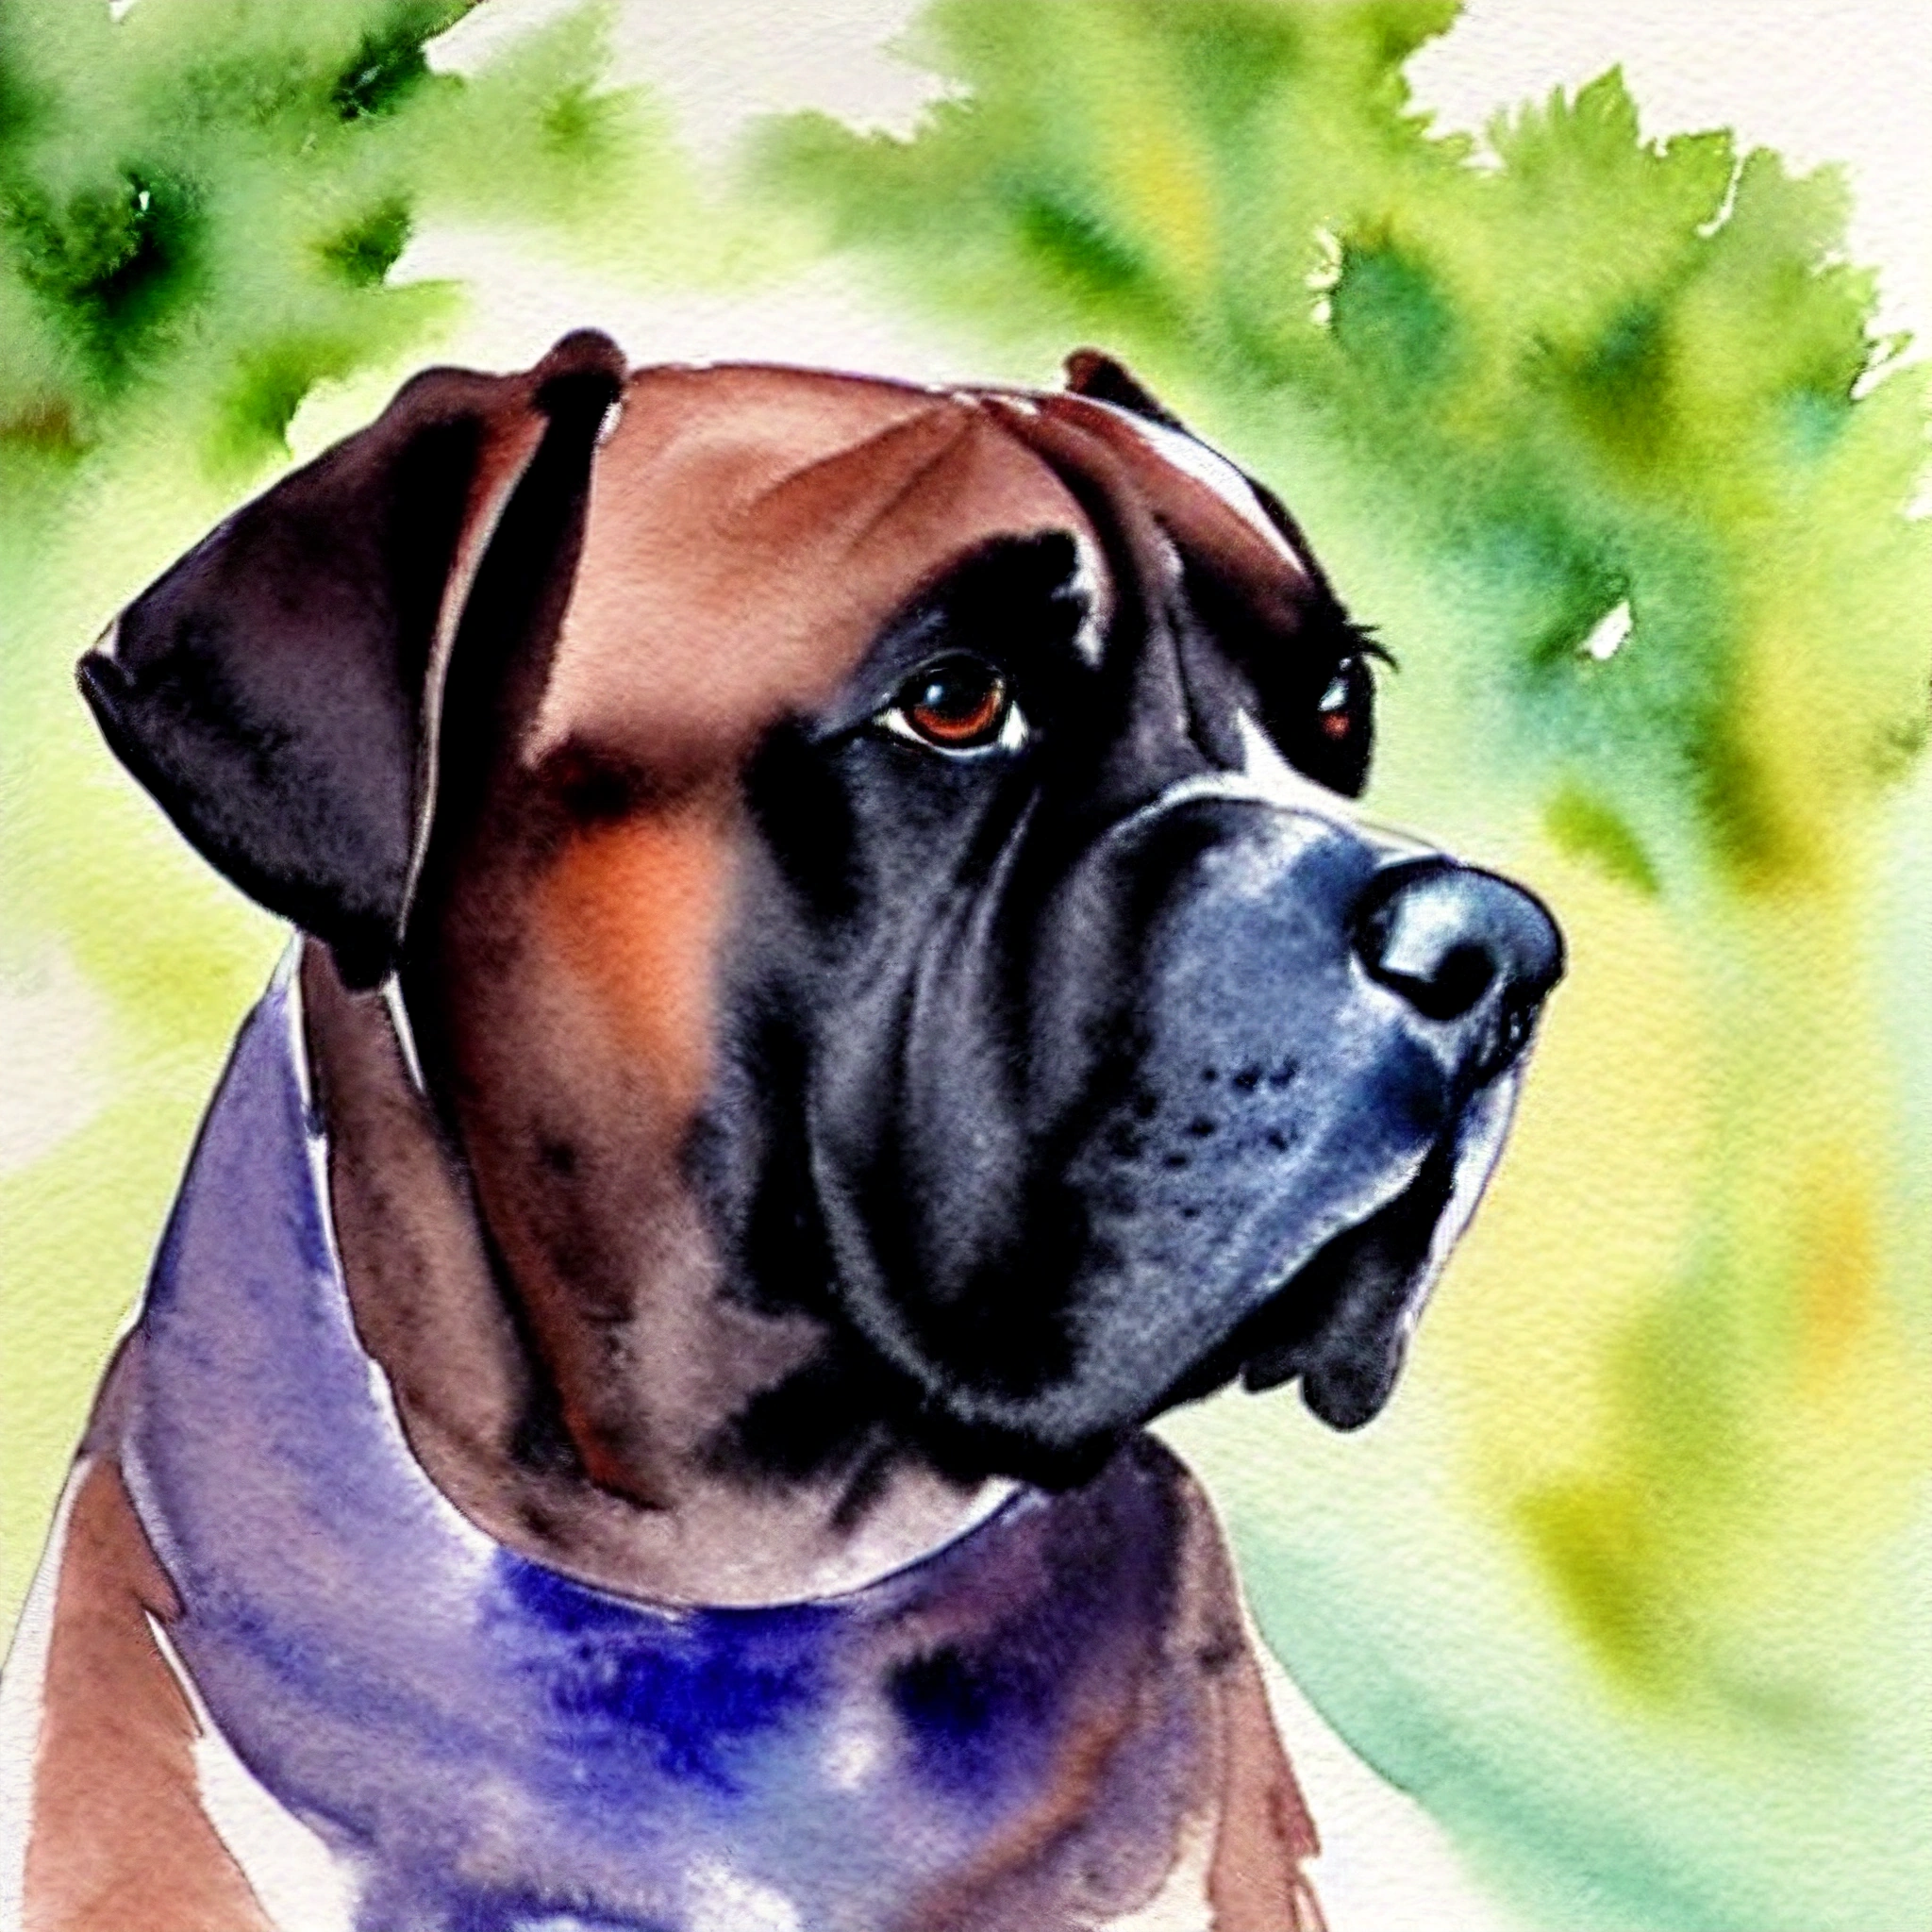 painting of a dog with a collar and a blue collar